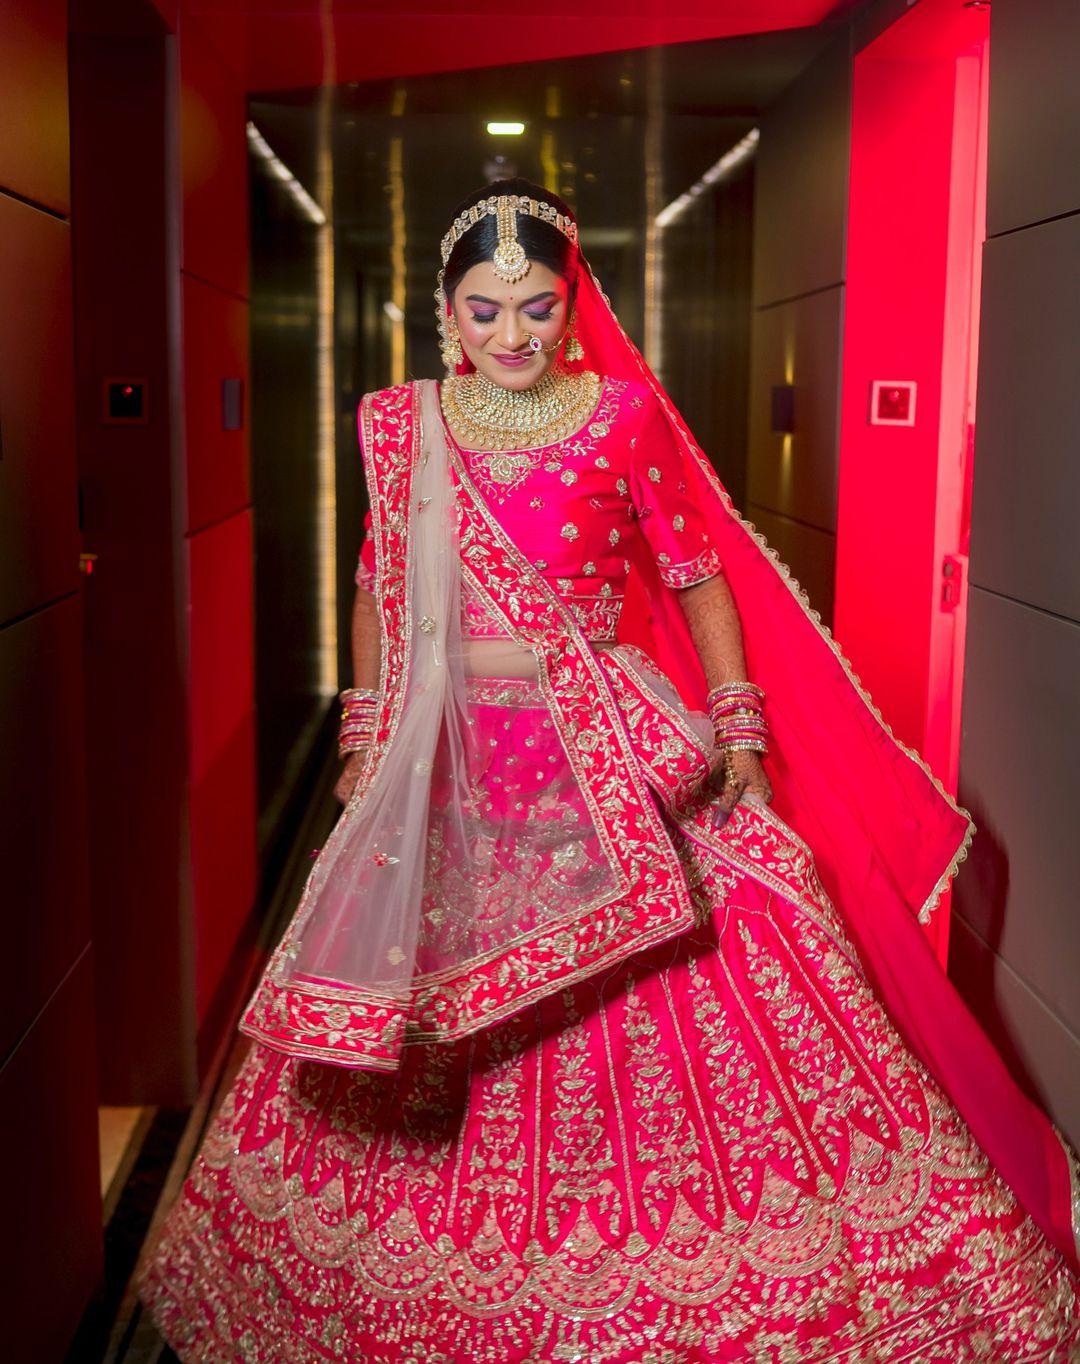 Bollywood Studio : Most Popular Poses for a Bridal Portrait Photo shoot